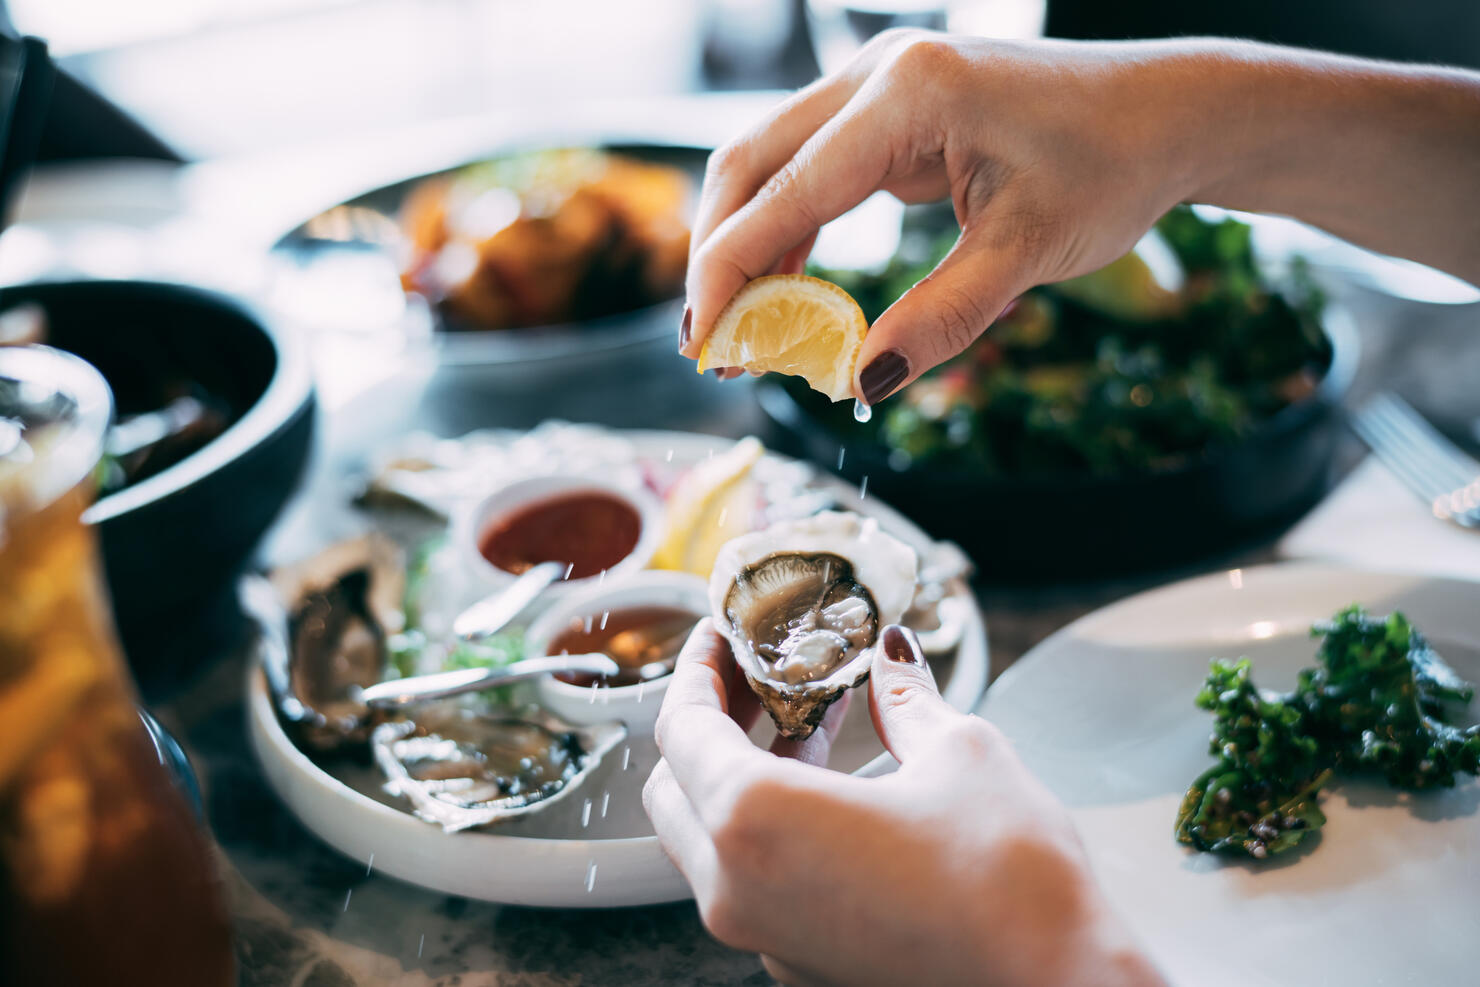 Close up of a woman's hand squeezing lemon juice on to a fresh oyster, enjoying a scrumptious meal in a restaurant. Eating out lifestyle